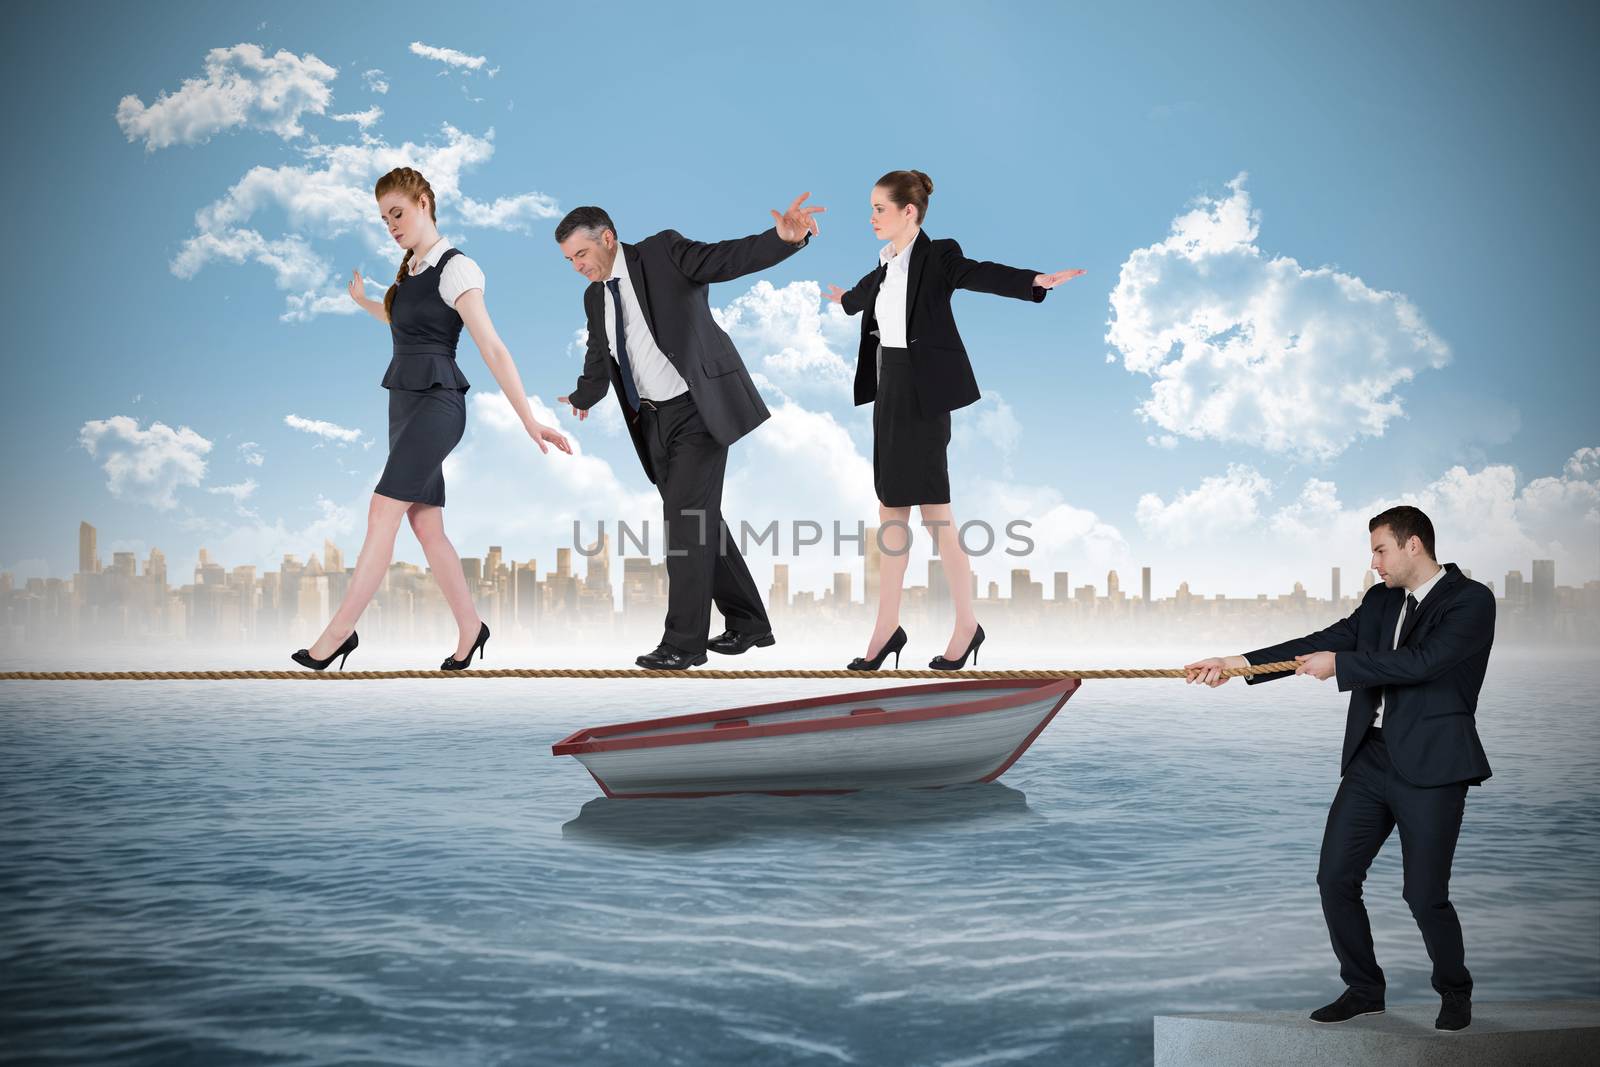 Young businessman pulling a tightrope for business people against small boat in the sea with city on horizon